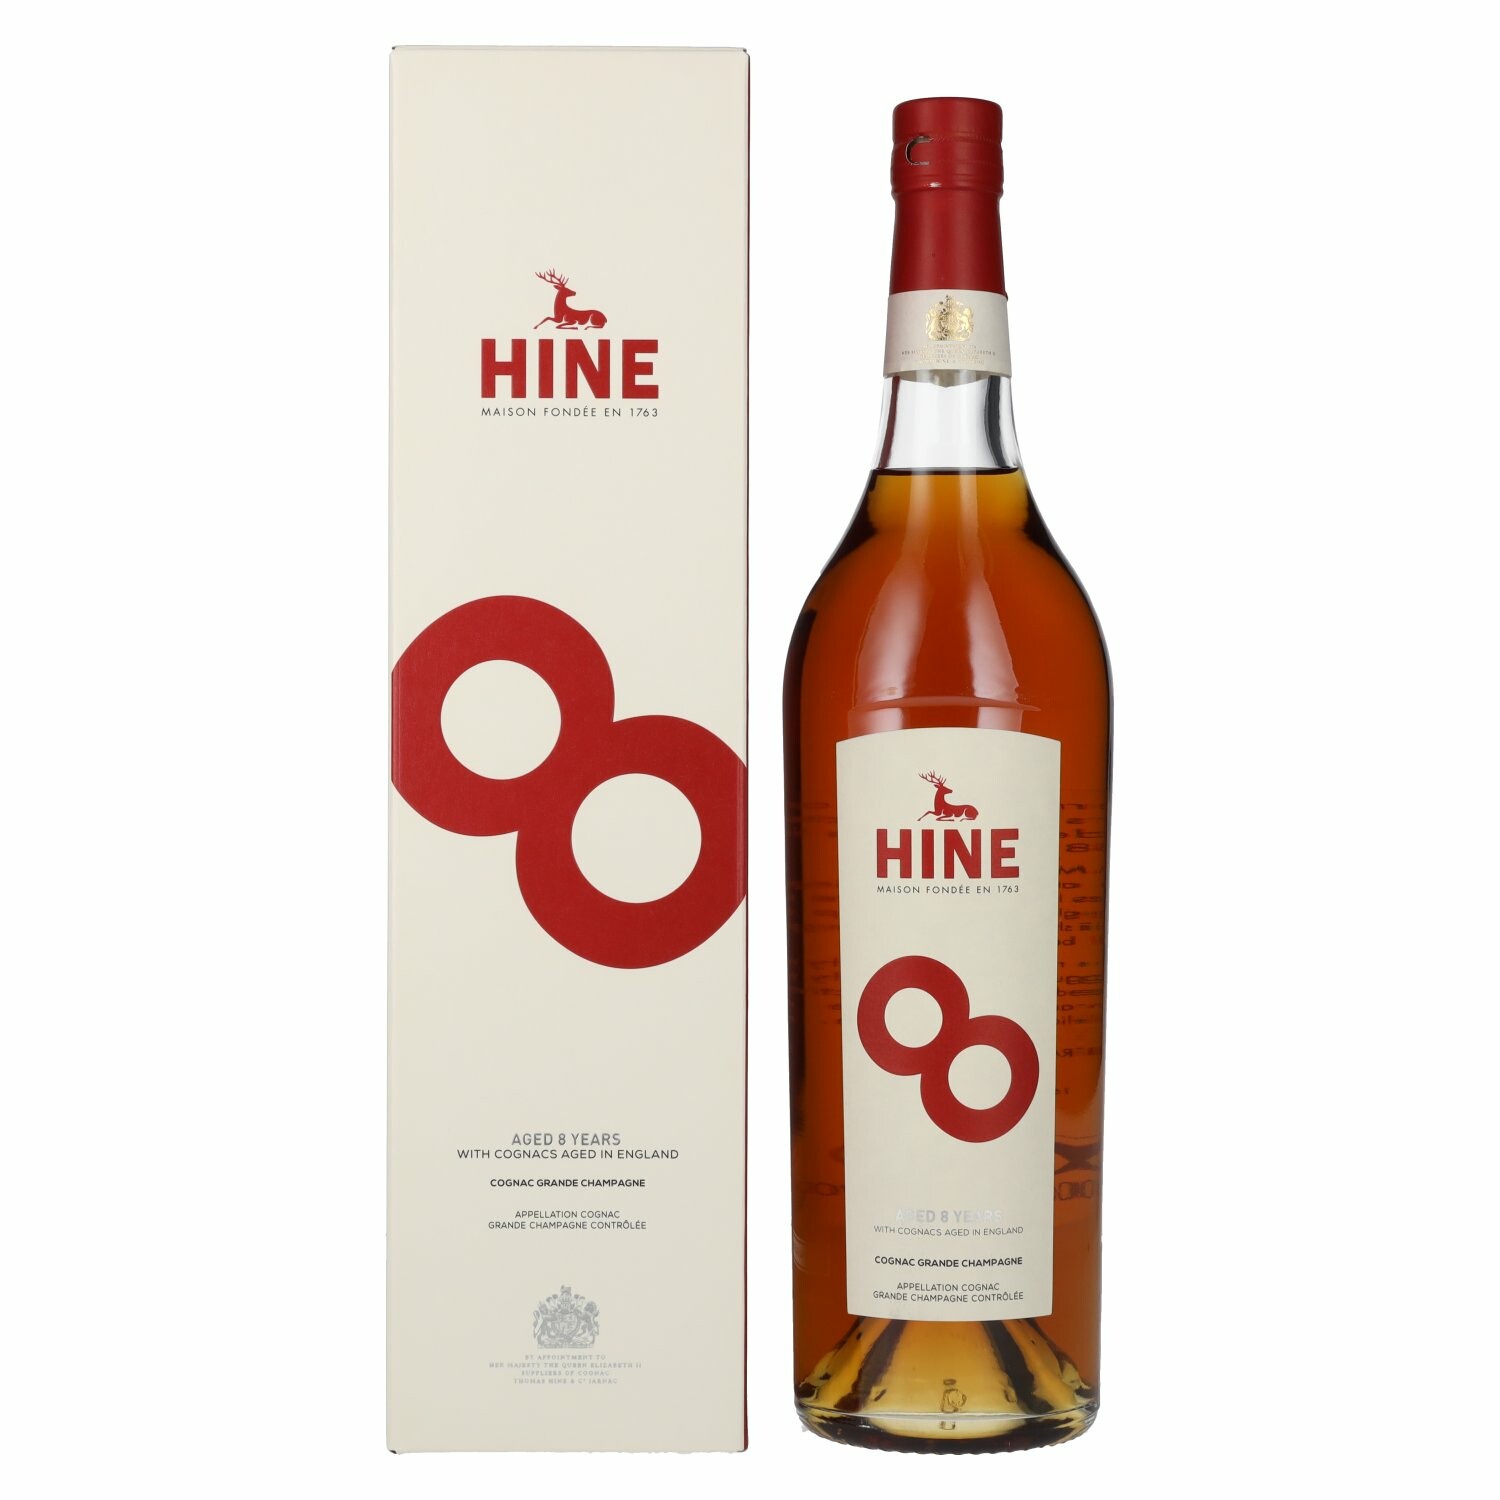 Hine Journey 8 Years Old Cognac Grande Champagne 42,1% Vol. 1l in Giftbox